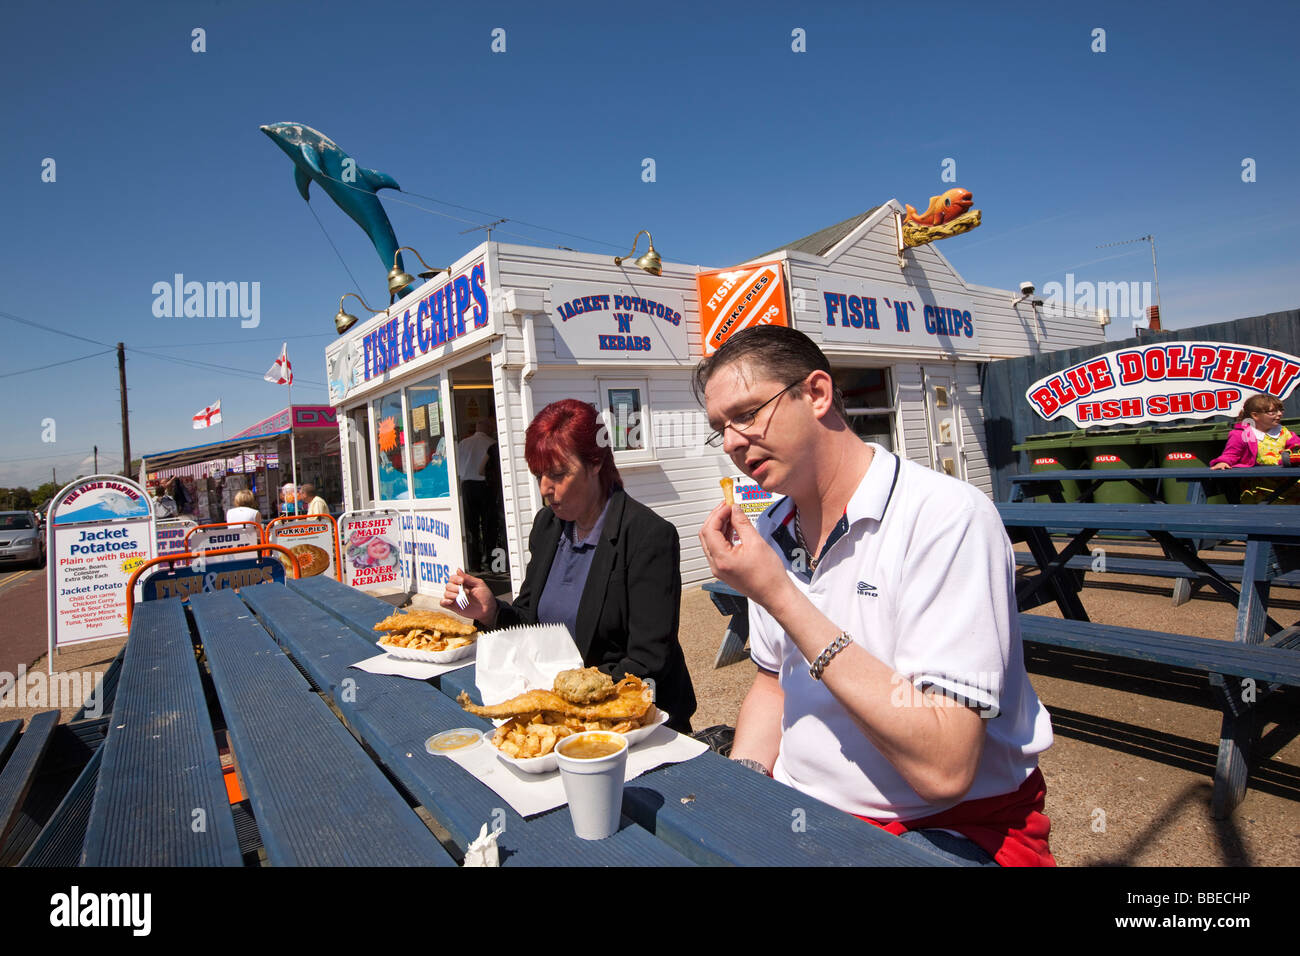 UK England Norfolk Hemsby Beach Road two people eating fish and chips takeaway food Stock Photo